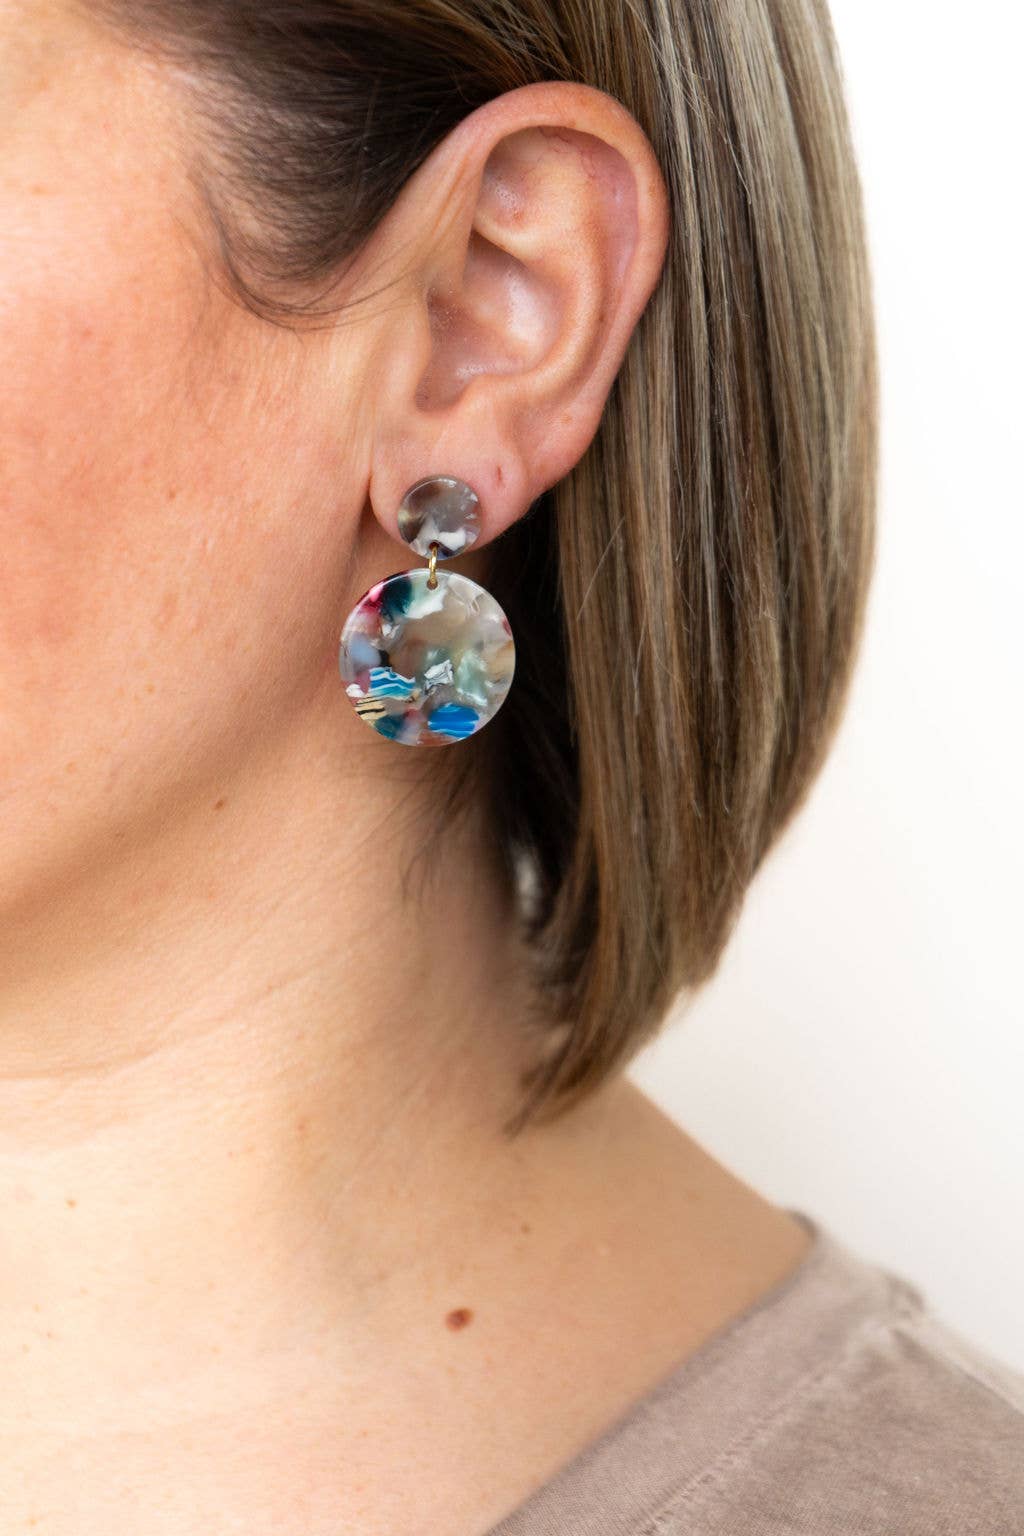 A person wearing multicolor Addy Earrings by Spiffy and Splendid.